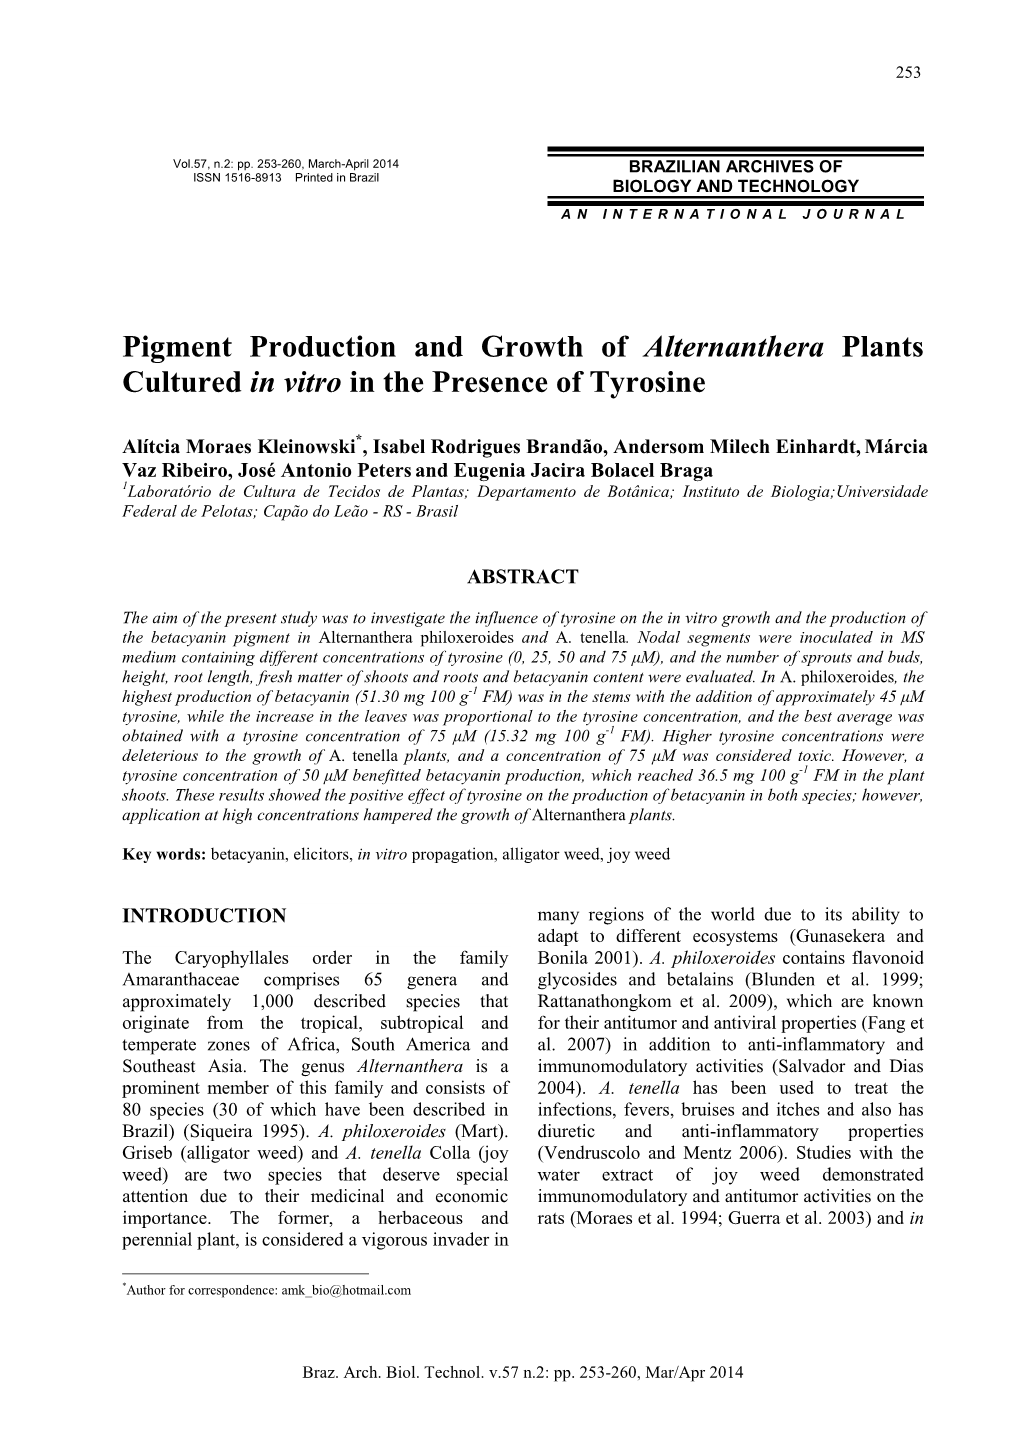 Pigment Production and Growth of Alternanthera Plants Cultured in Vitro in the Presence of Tyrosine